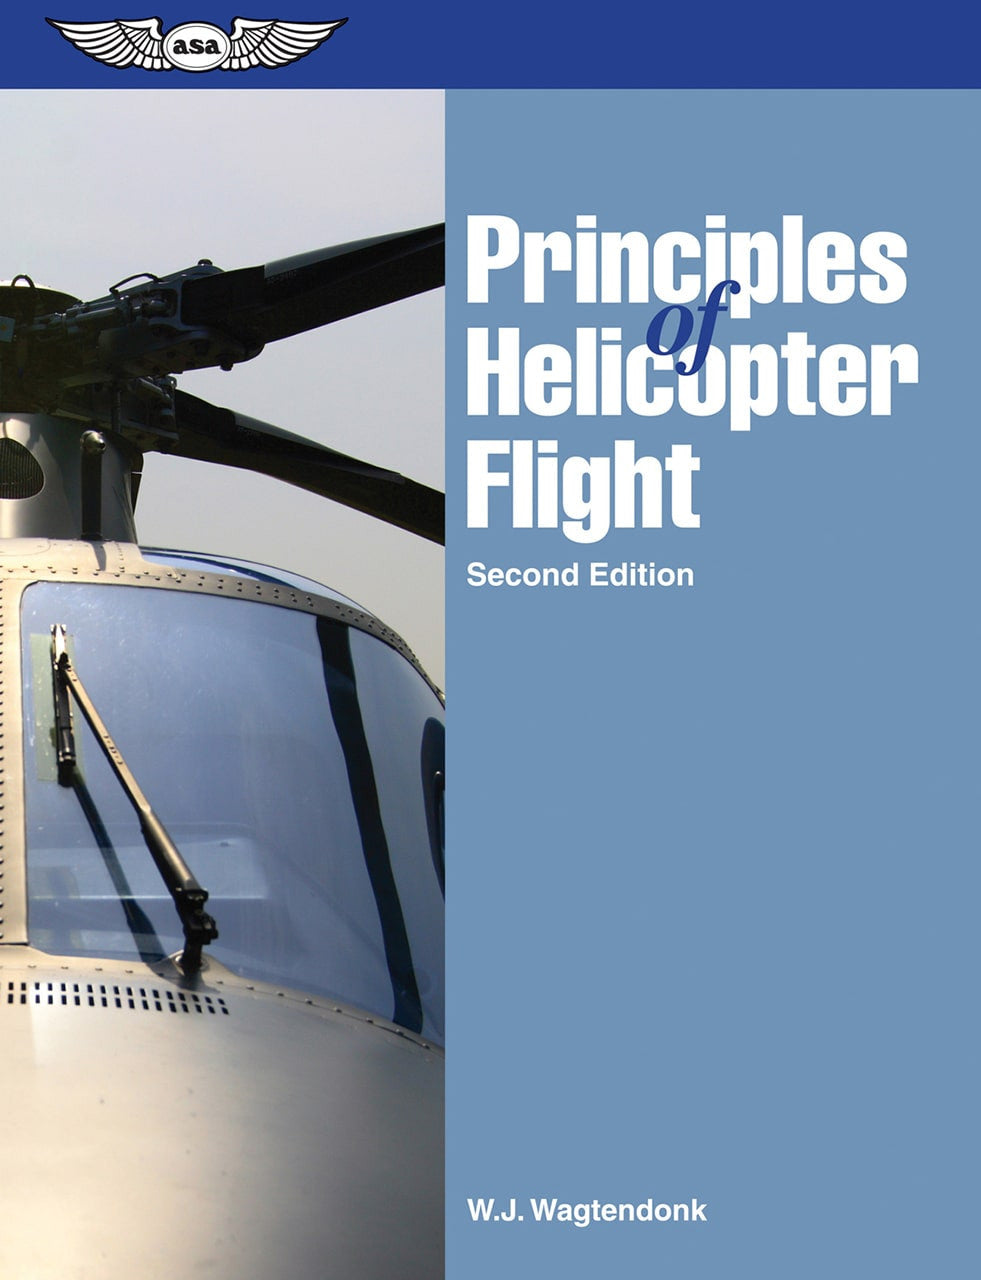 Principles of Helicopter Flight (second edition )